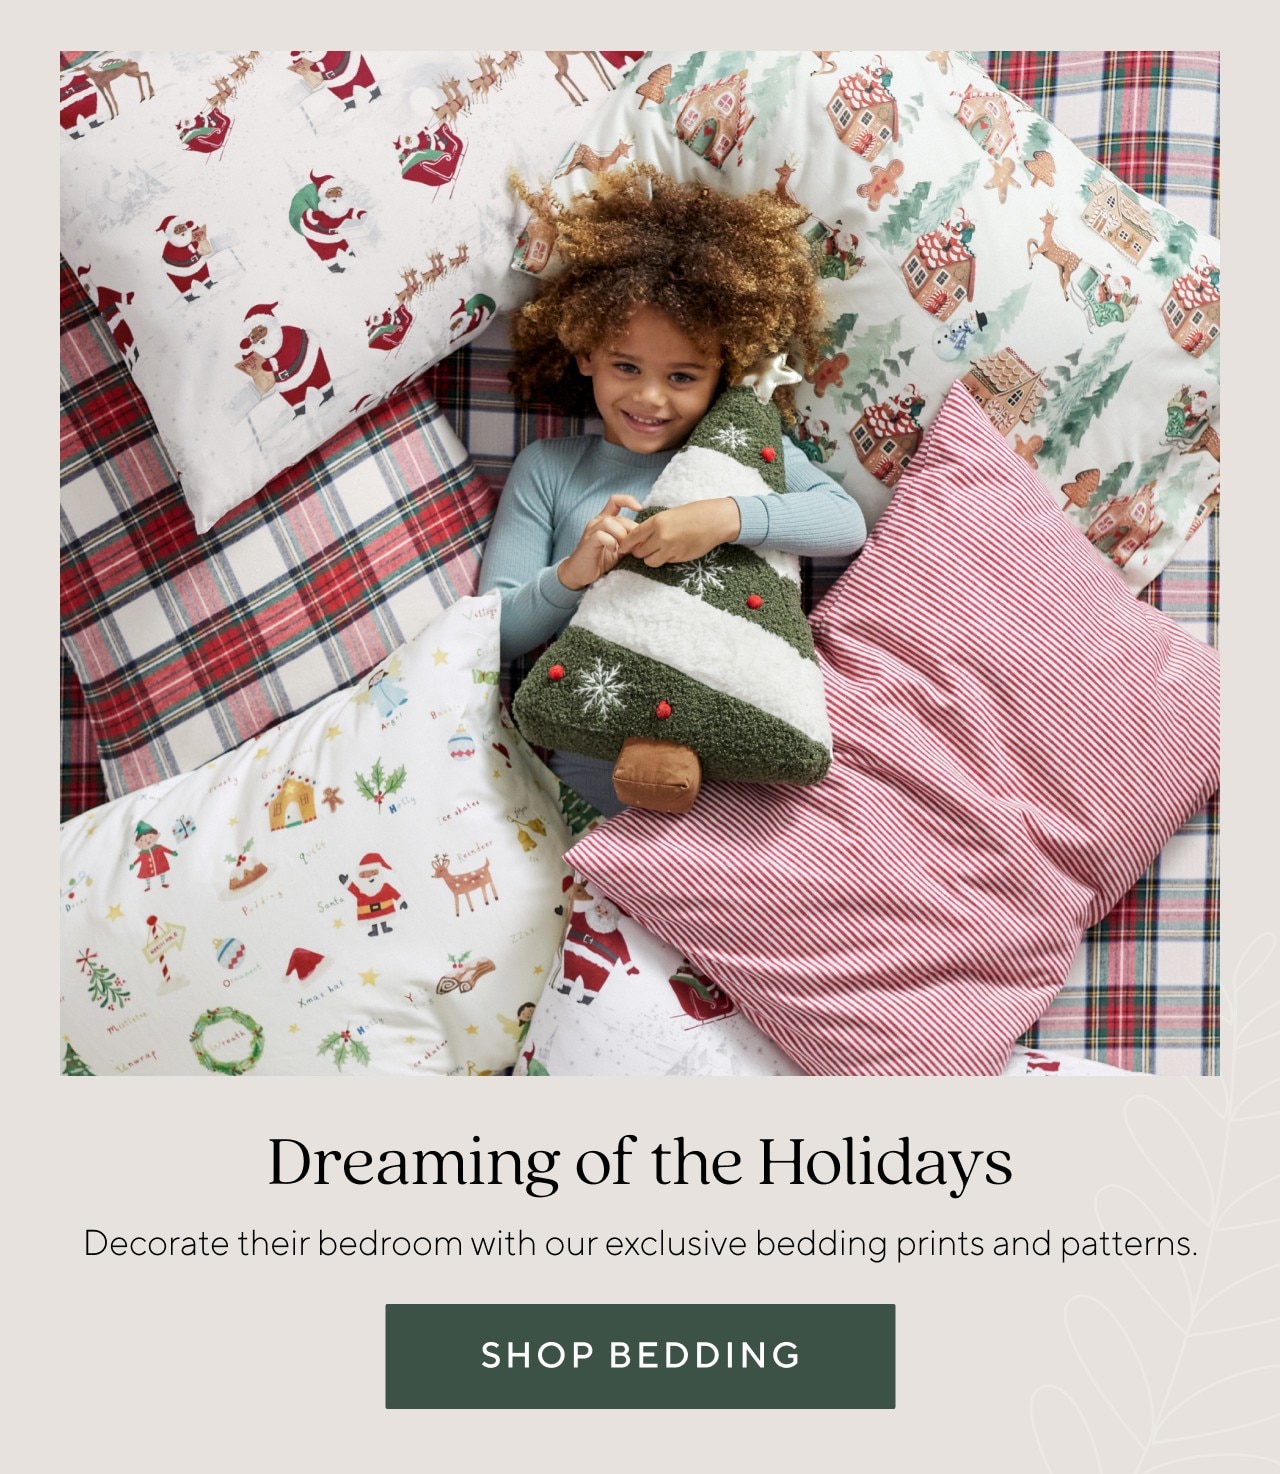 DREAMING OF THE HOLIDAYS - SHOP BEDDING